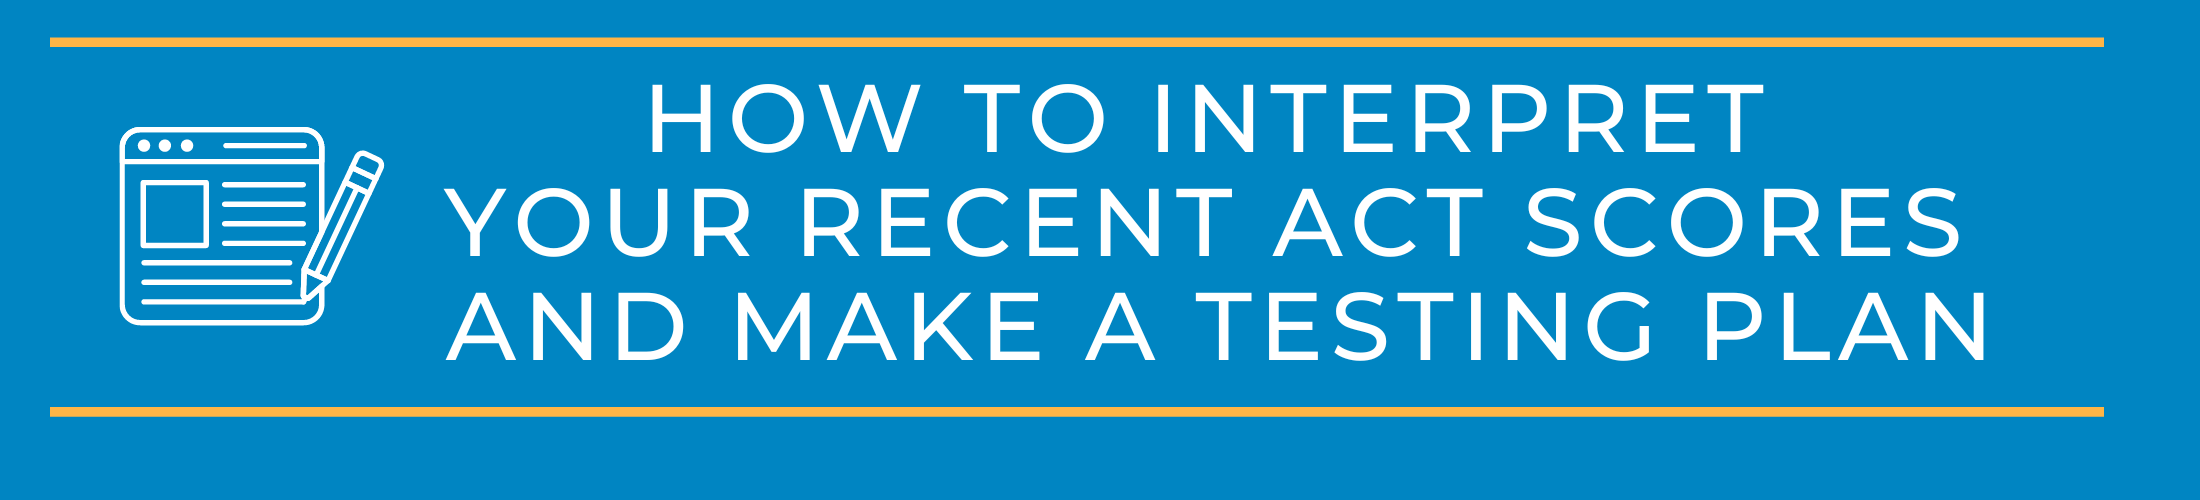 How to Interpret Your Recent ACT Scores and Make a Testing Plan